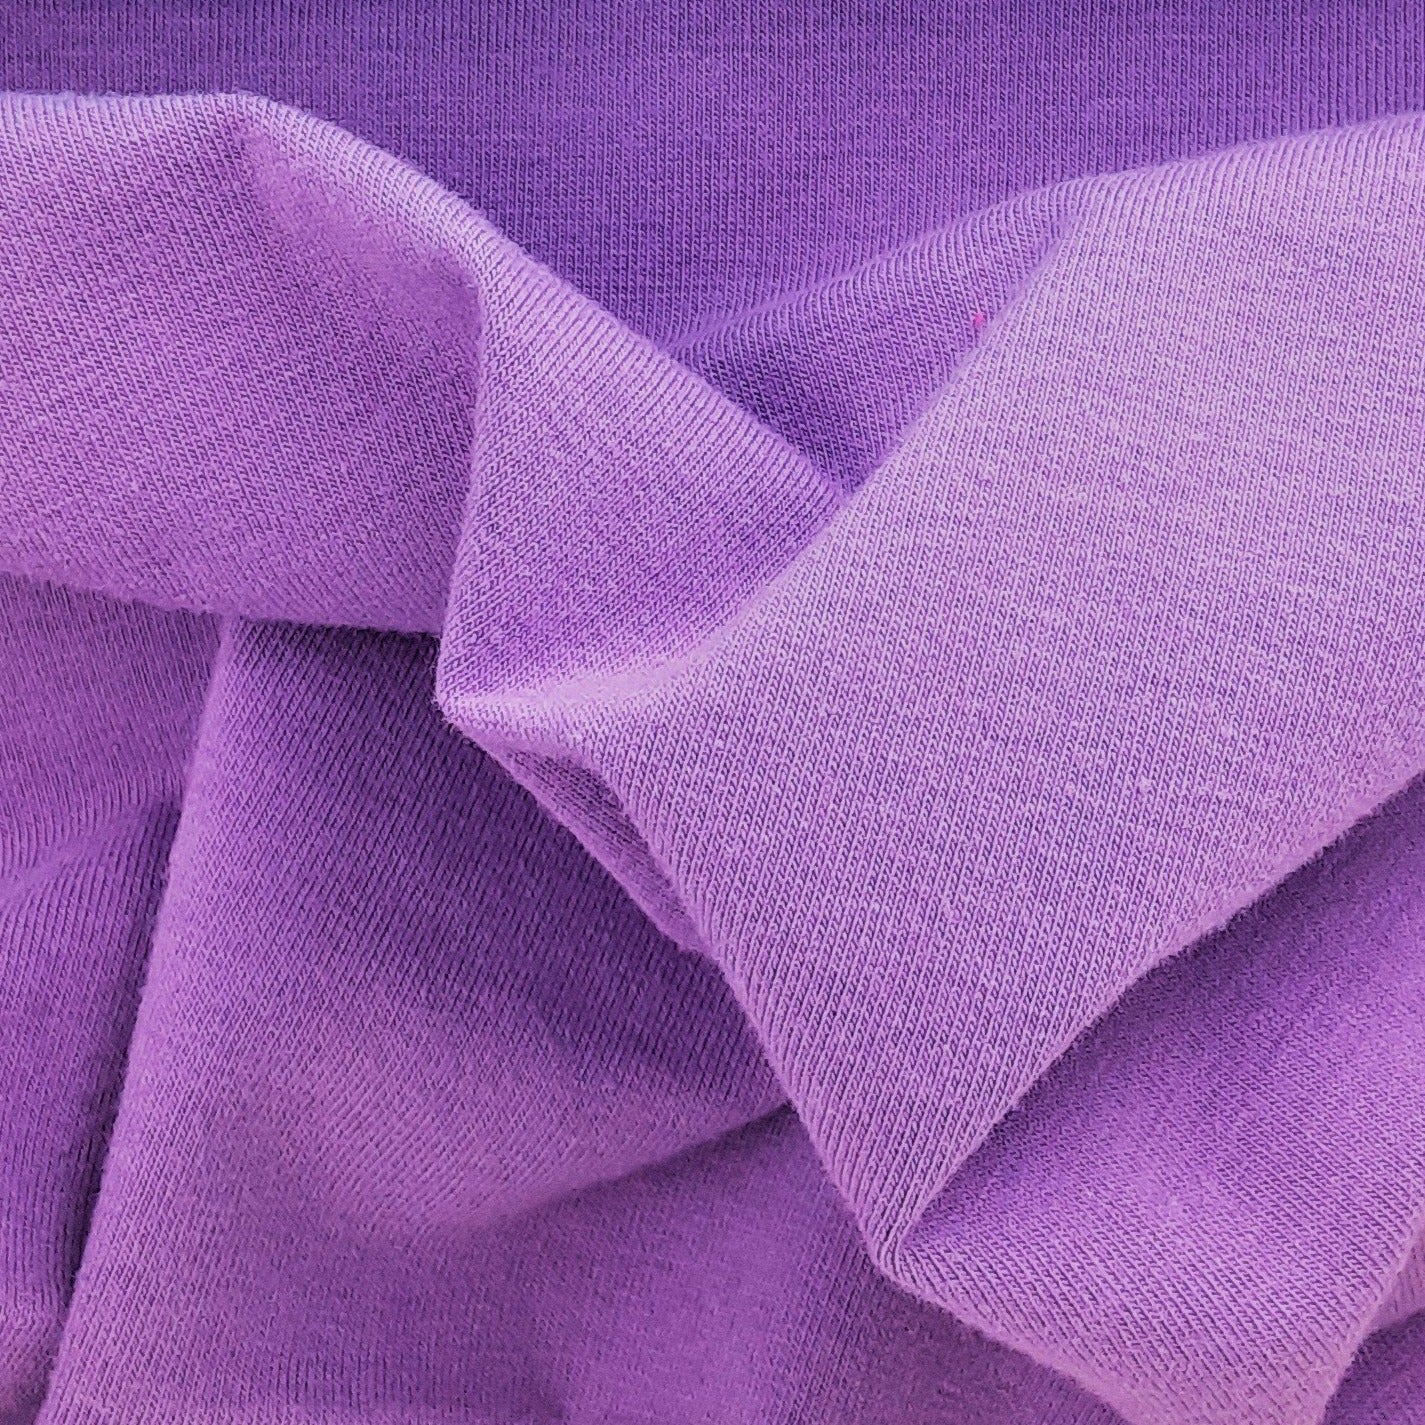 Orchid 10 Ounce Cotton/Spandex Jersey Knit Fabric - SKU 2853L 